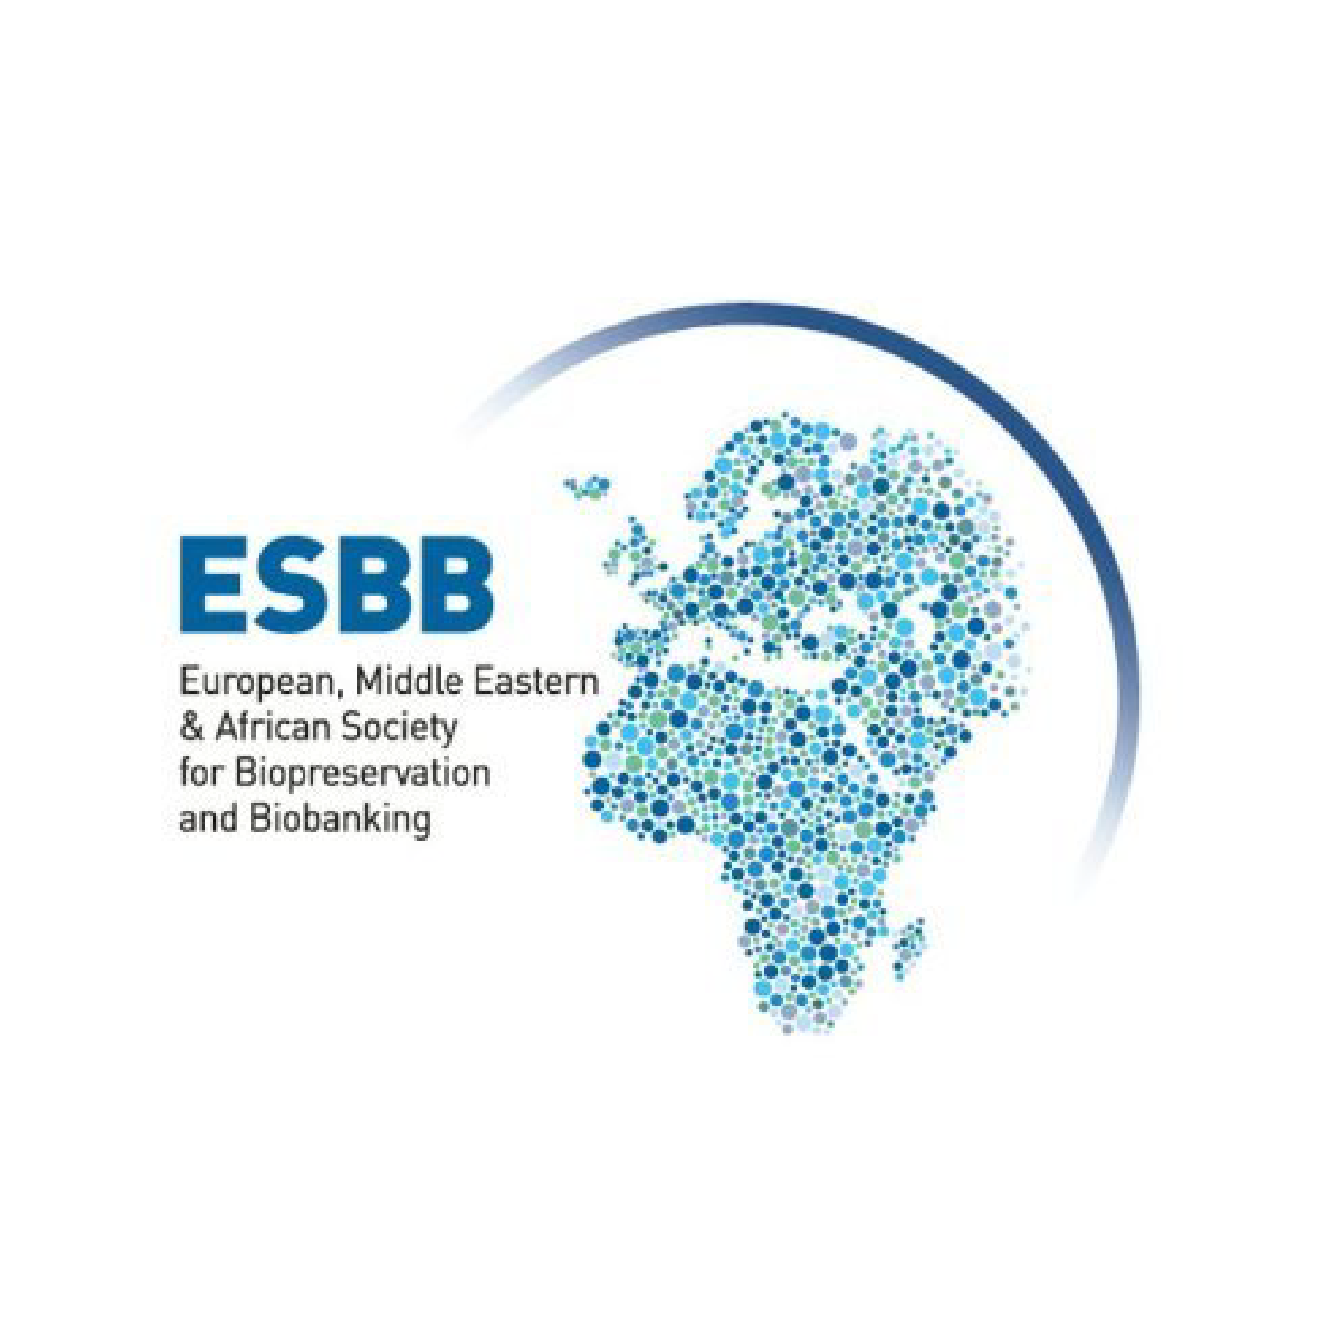 ESBB - European, Middle Eastern & African Society for Biopreservation and Biobanking